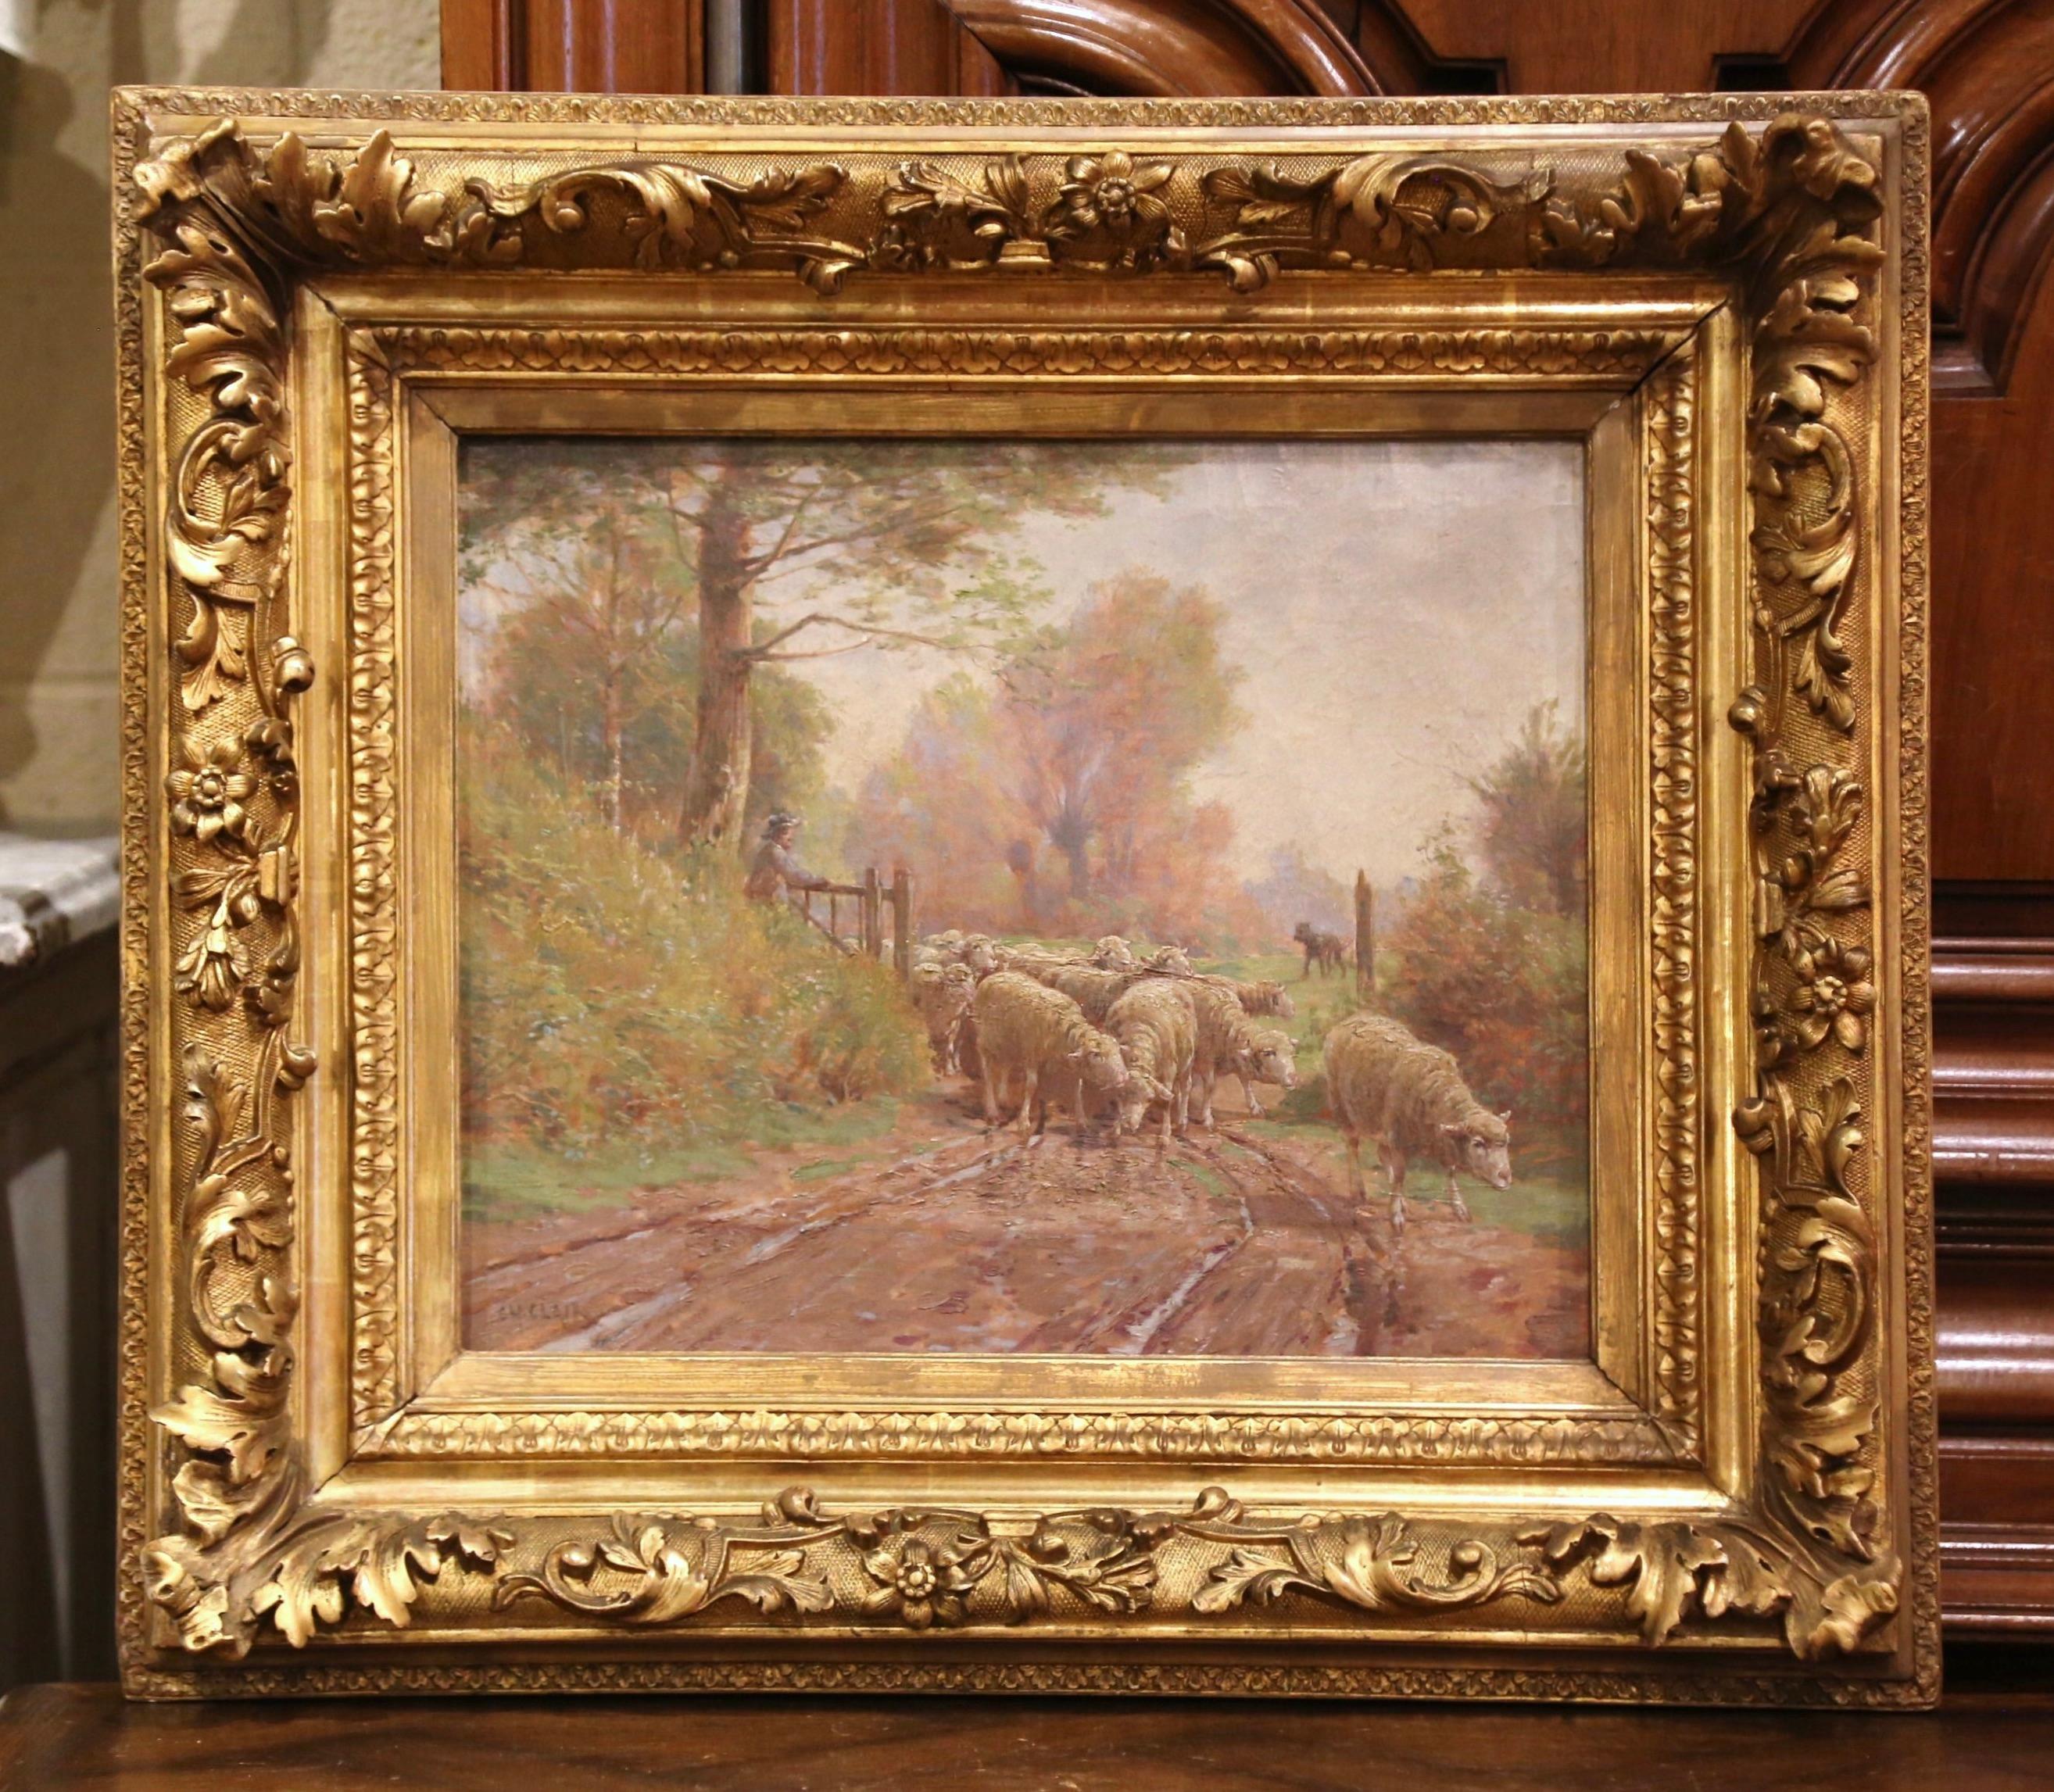 Giltwood 19th Century French Sheep Painting in Carved Gilt Frame Signed Charles Clair For Sale